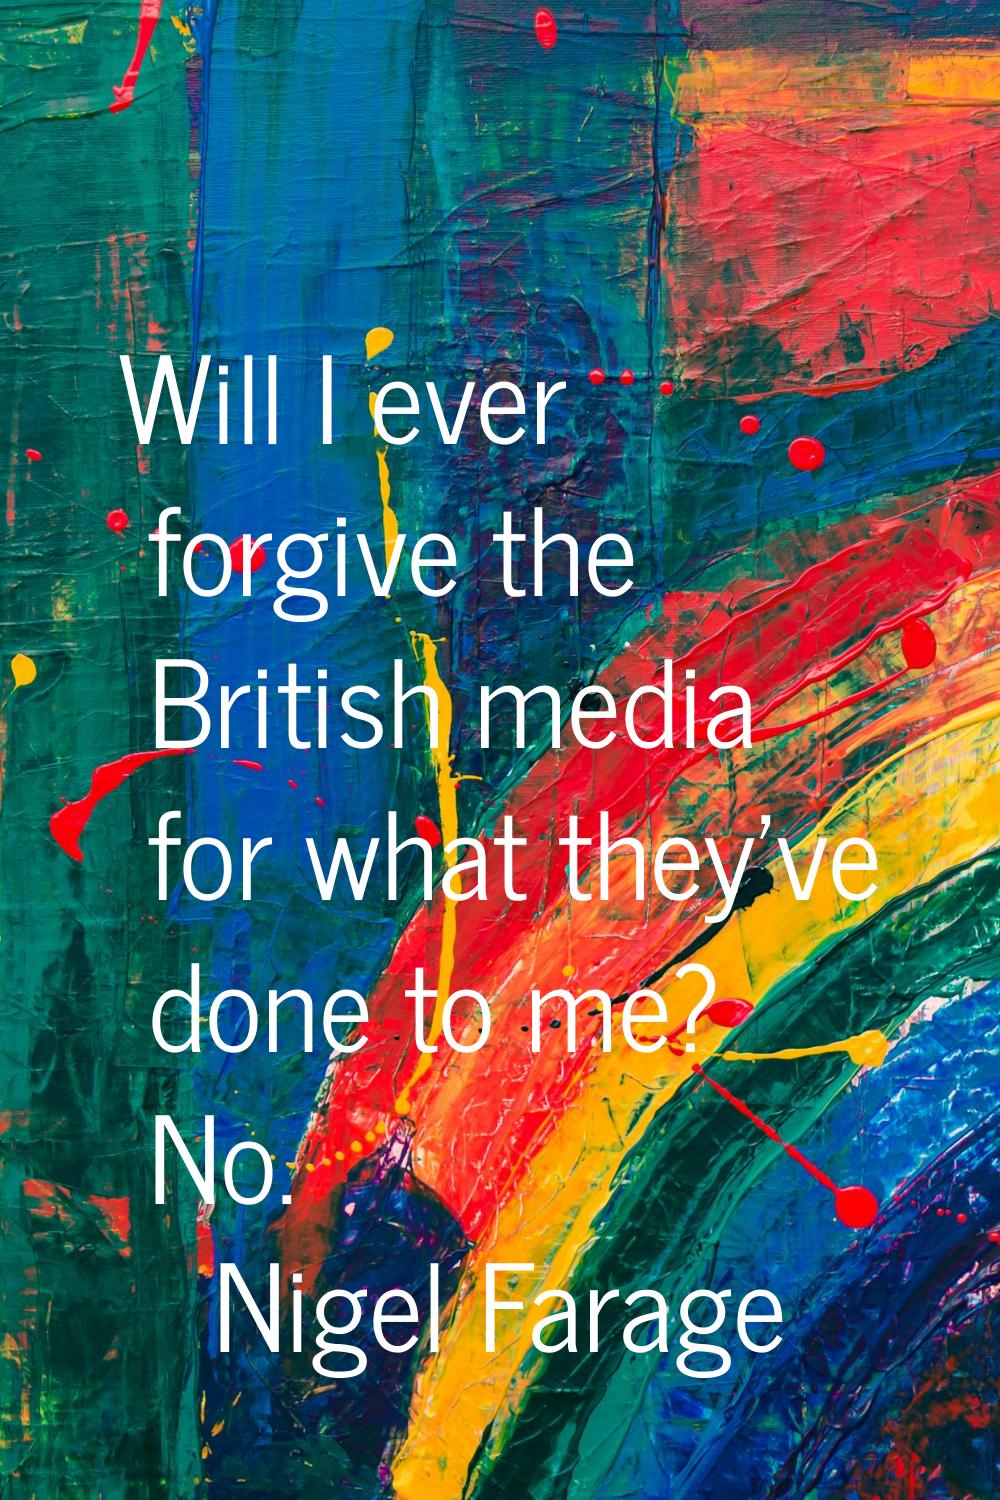 Will I ever forgive the British media for what they've done to me? No.